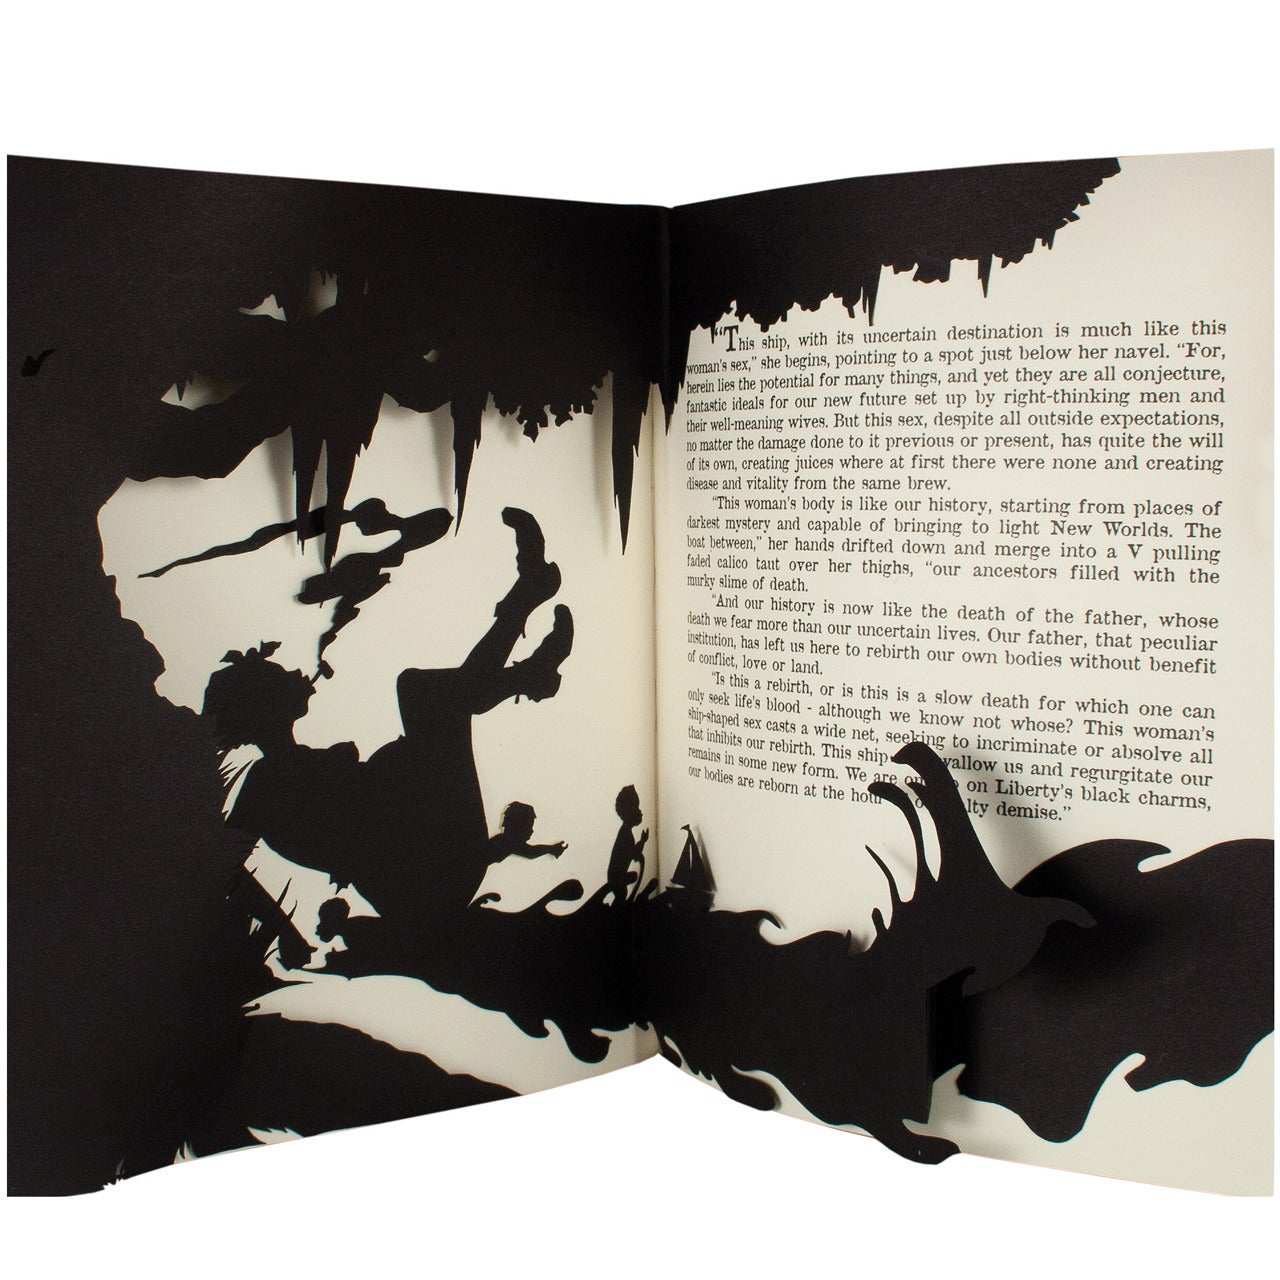 "Freedom: a Fable, "Pop-Up Book by Kara Walker